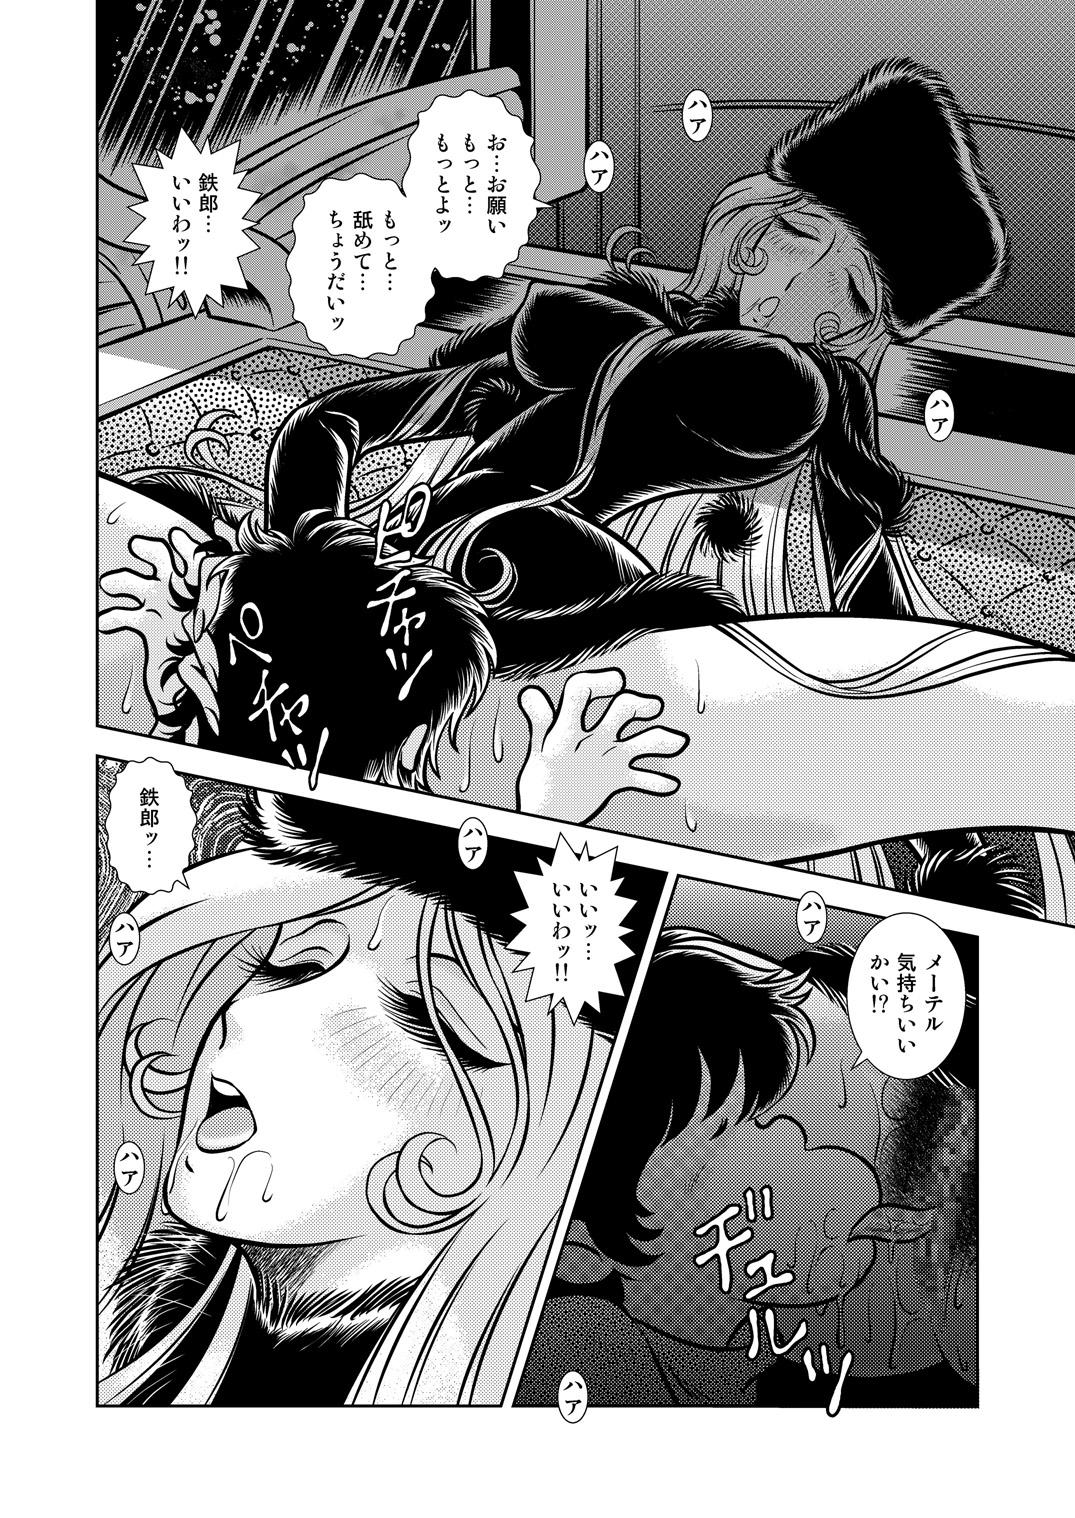 Rough Fuck Maetel Story 11 - Galaxy express 999 Unshaved - Page 10